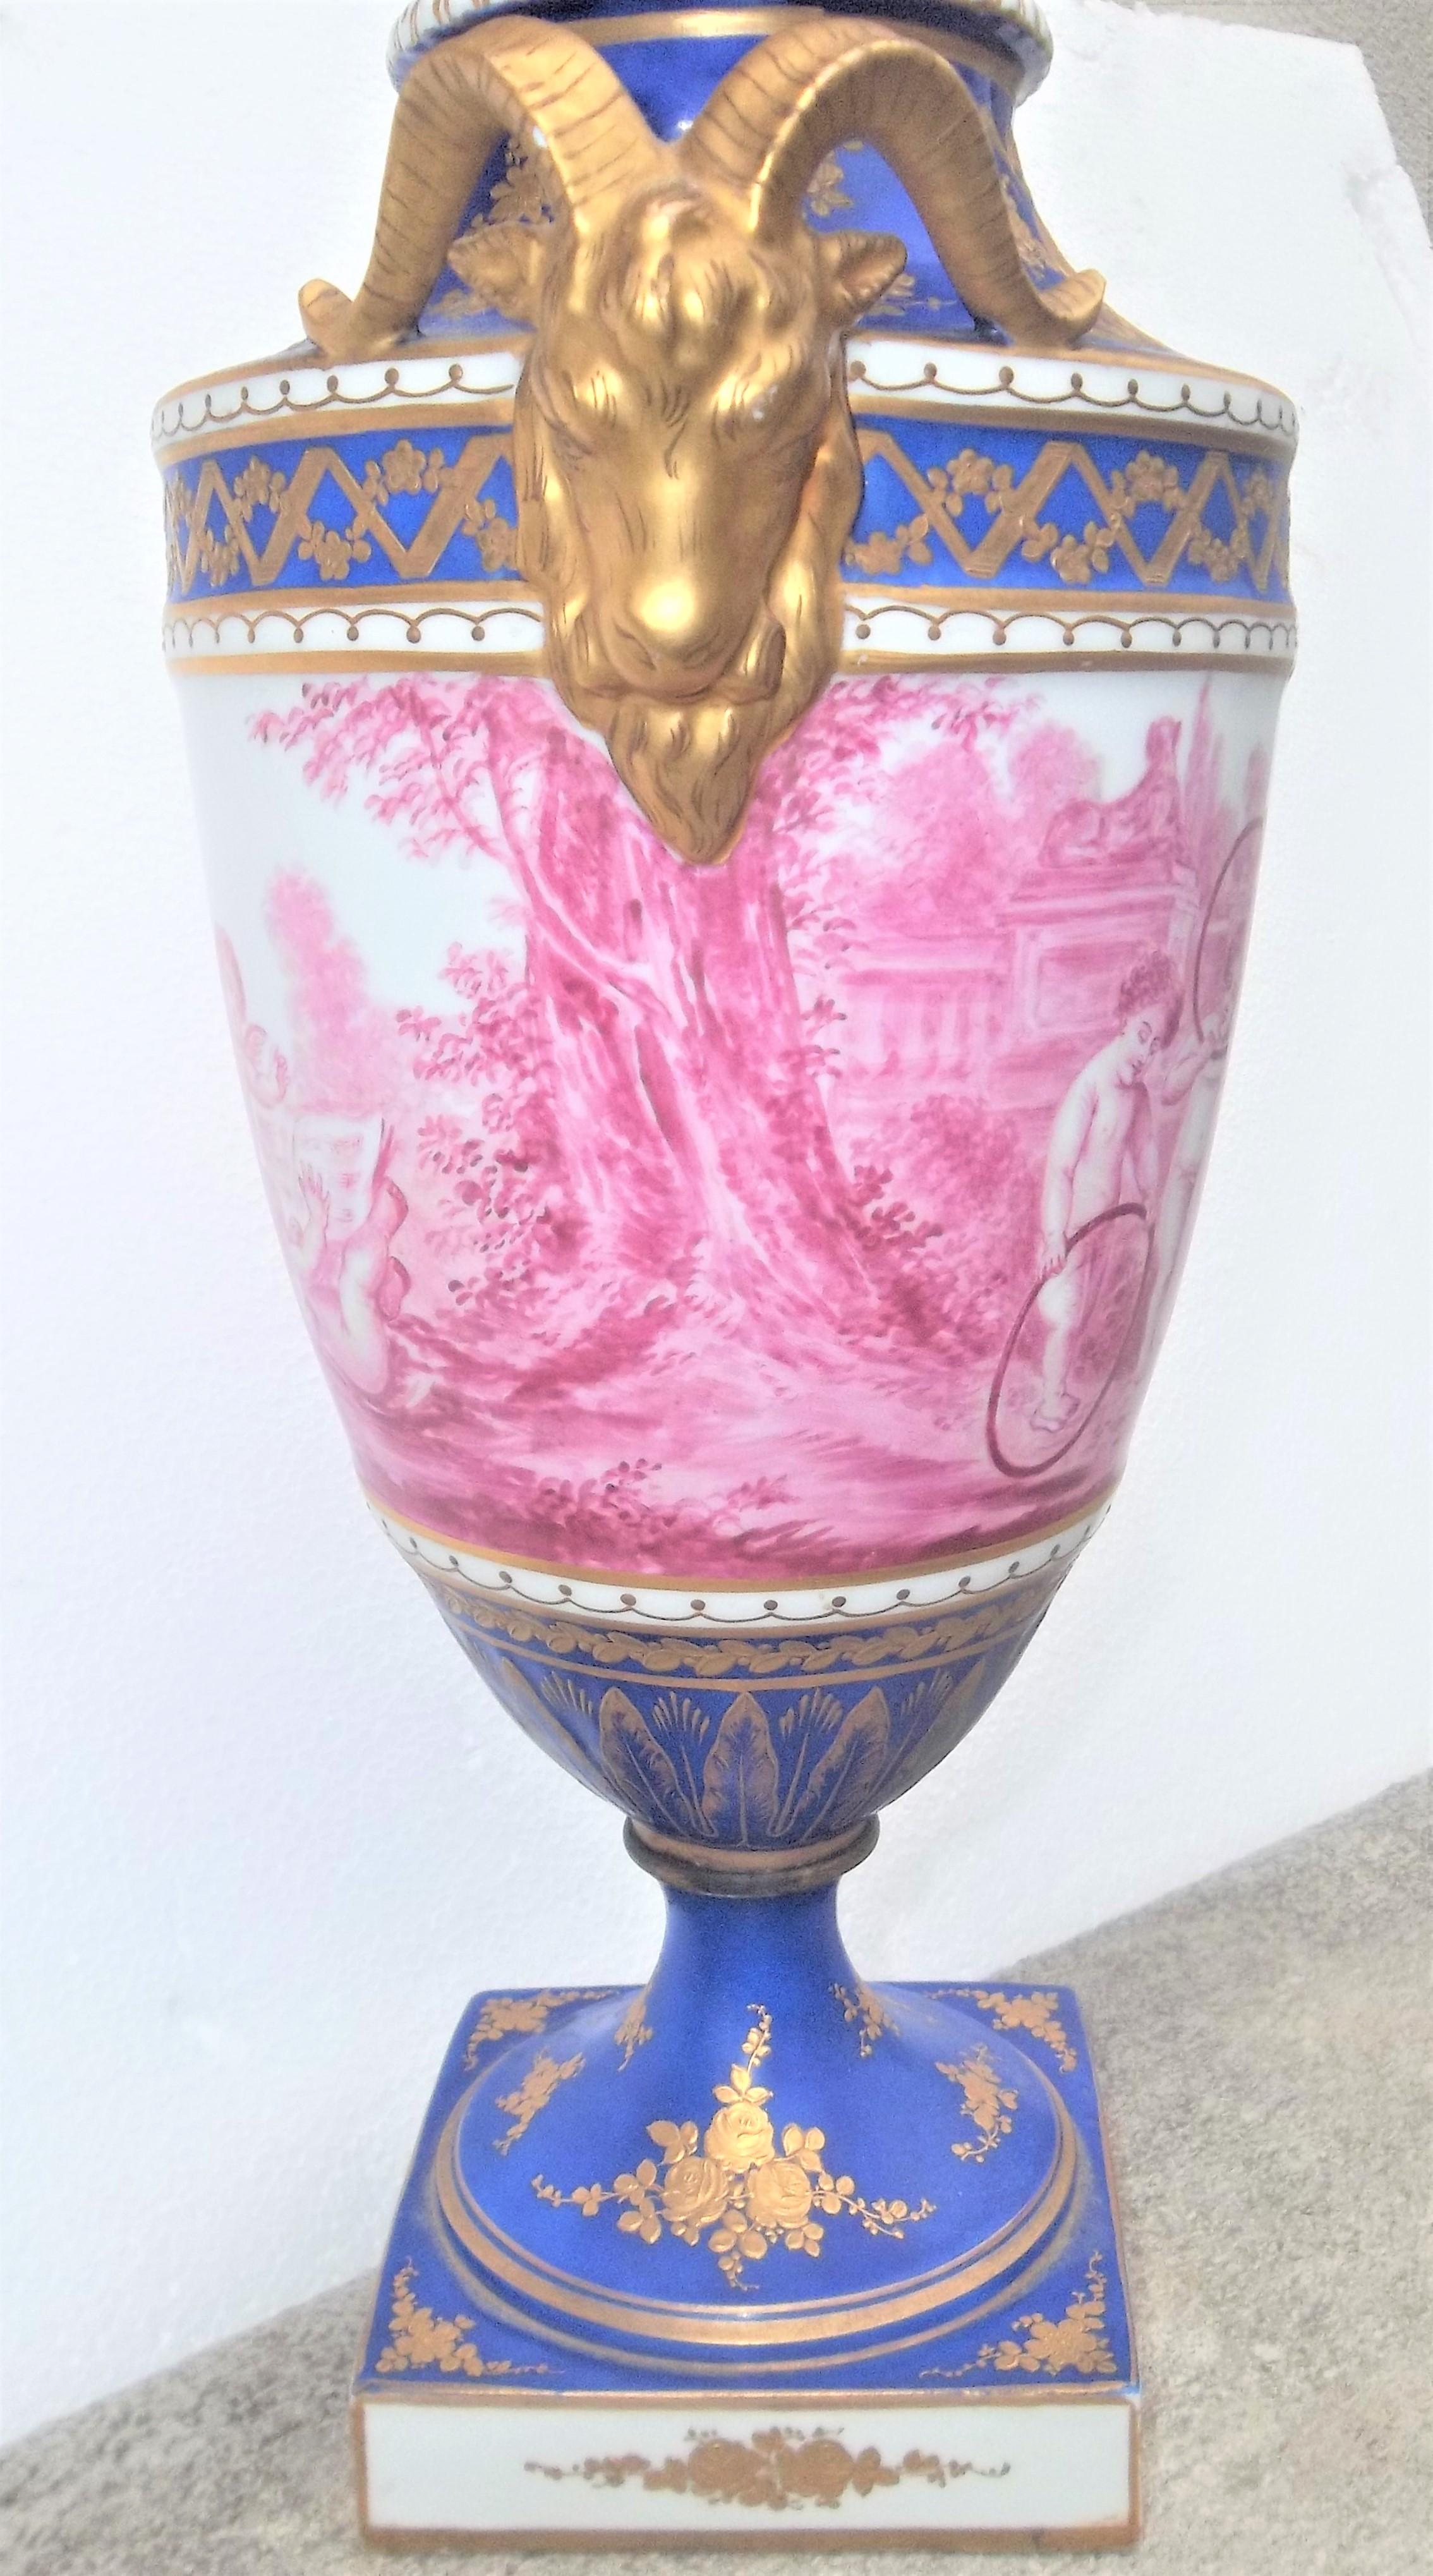 Sèvres-style parcel-gilt putti or cherub decorated covered urn having an urn-form body decorated in puce with a continuous scene of putti at play, signed Henri . The blue ground decorated with musical trophy and floral sprays .The sides flanked by